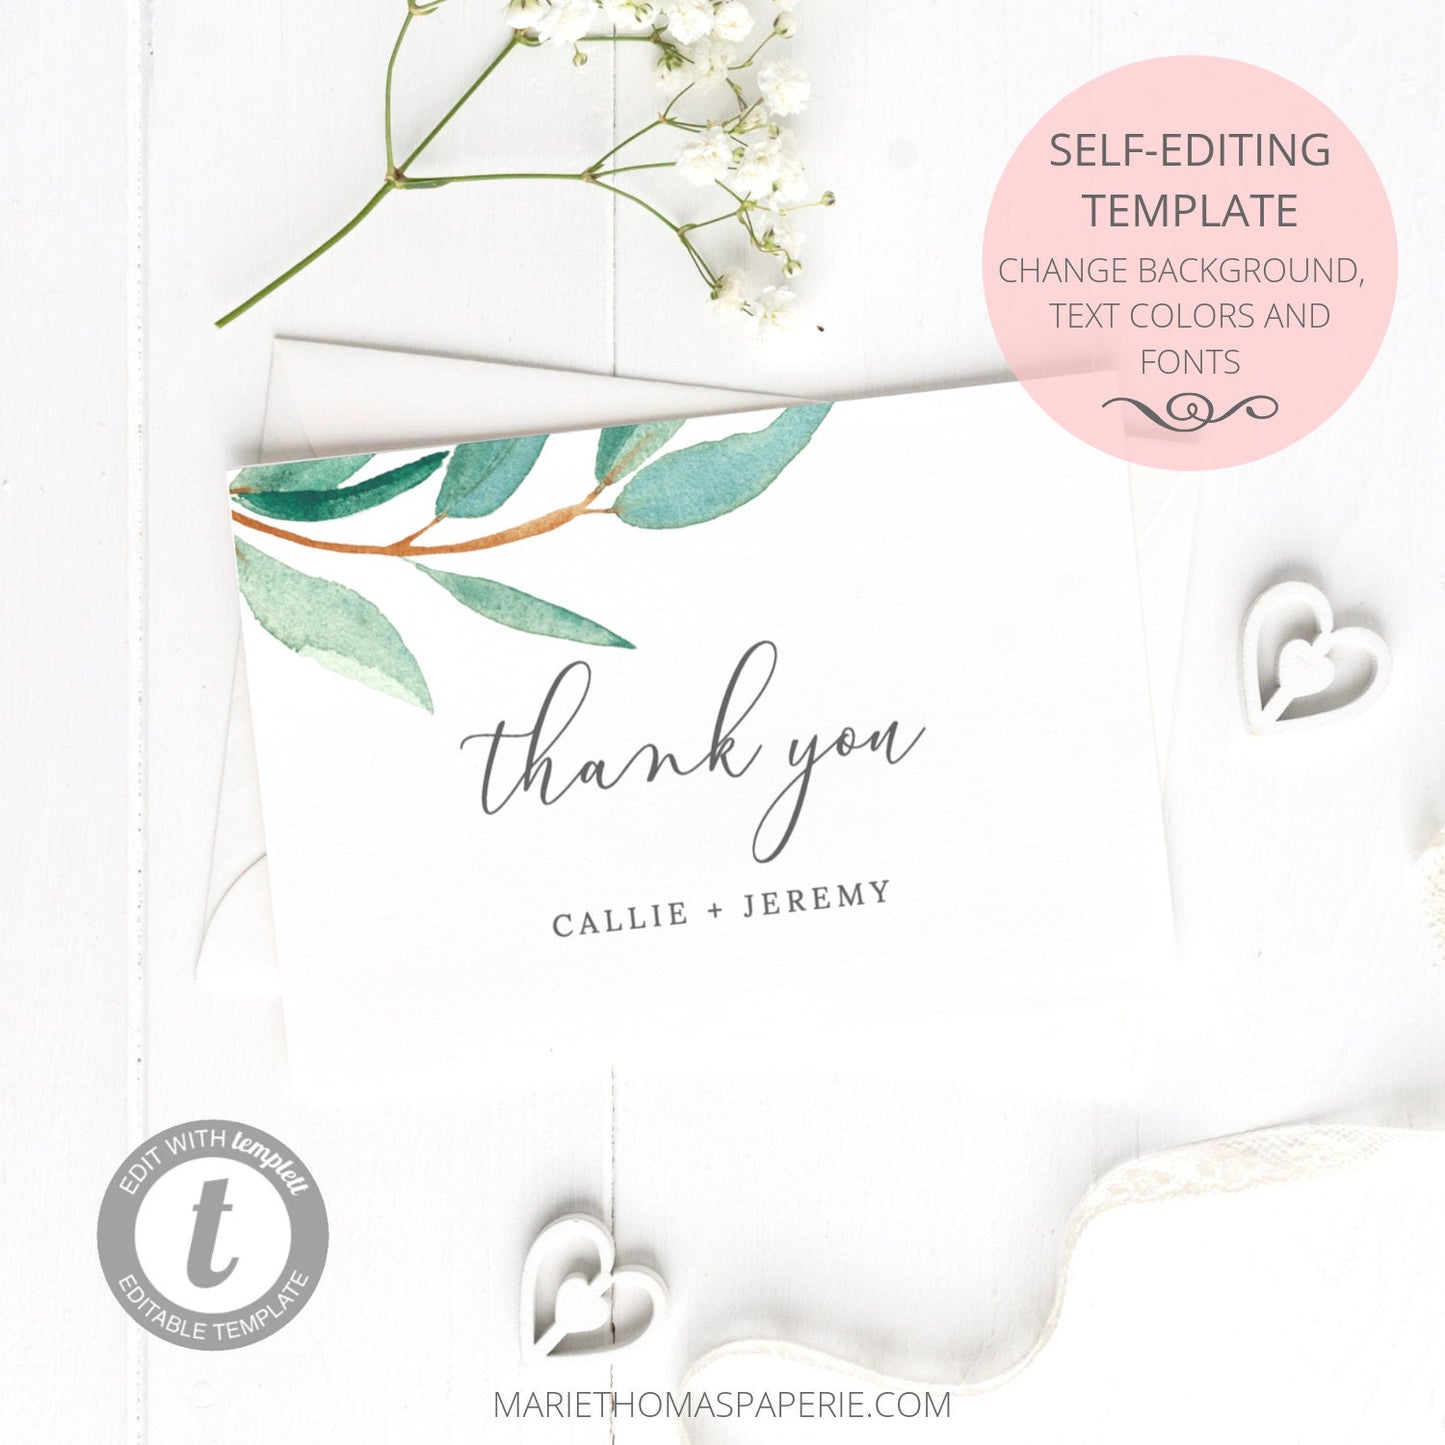 Editable Wedding Thank You Cards Cards Bridal Shower Thank You Cards Modern Script Greenery Template